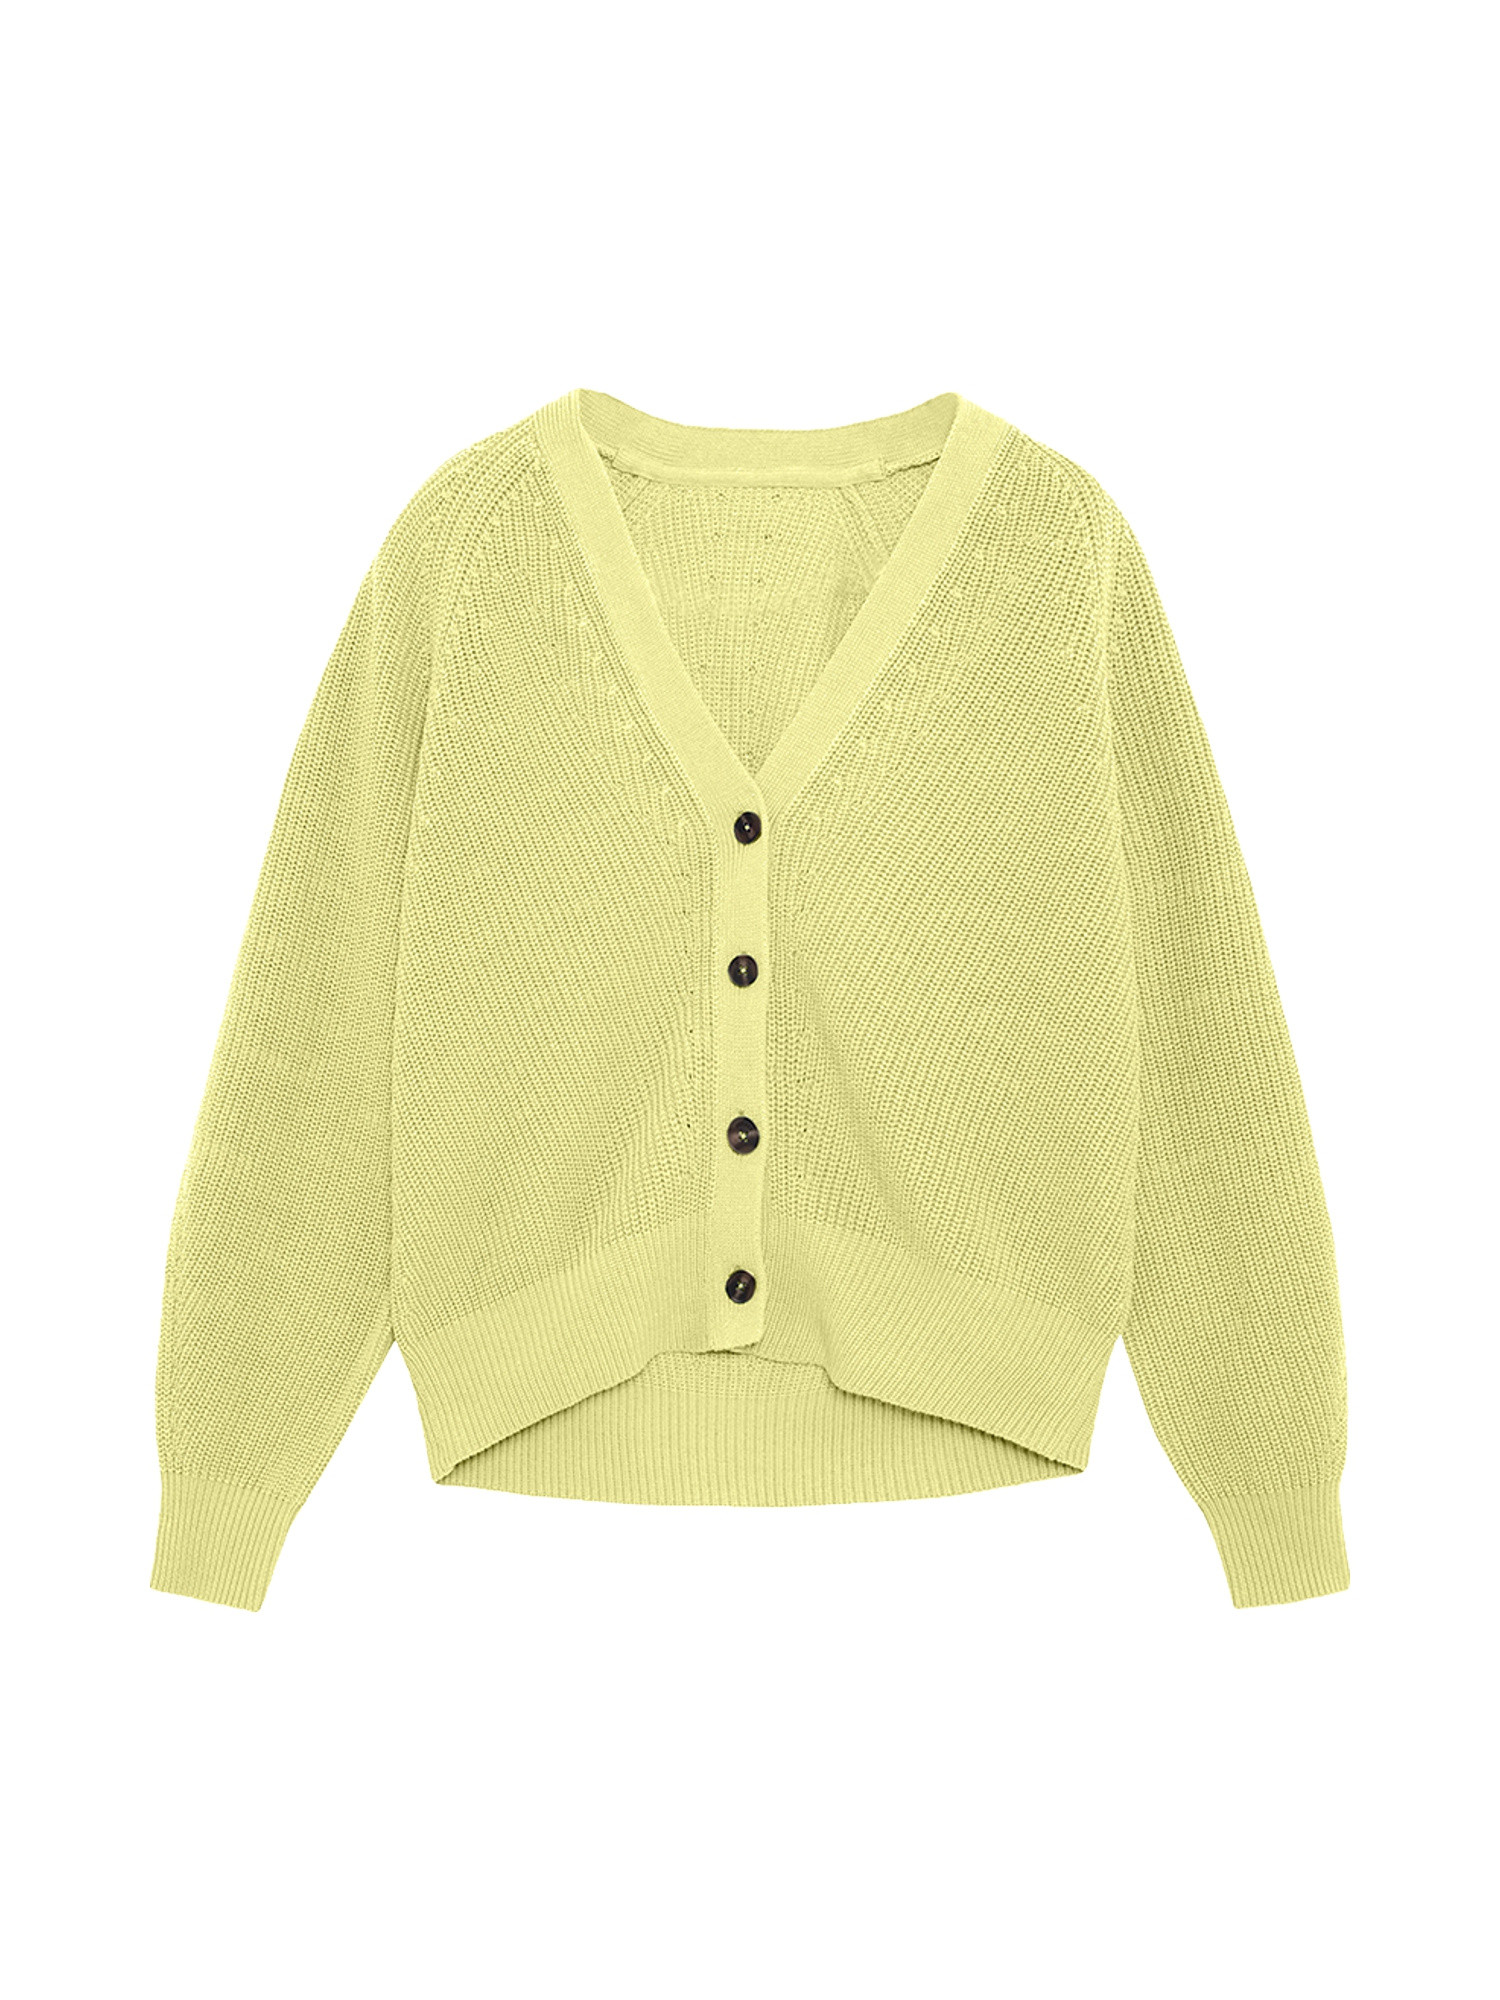 Ecoalf - Knitted cardigan, Yellow, large image number 0